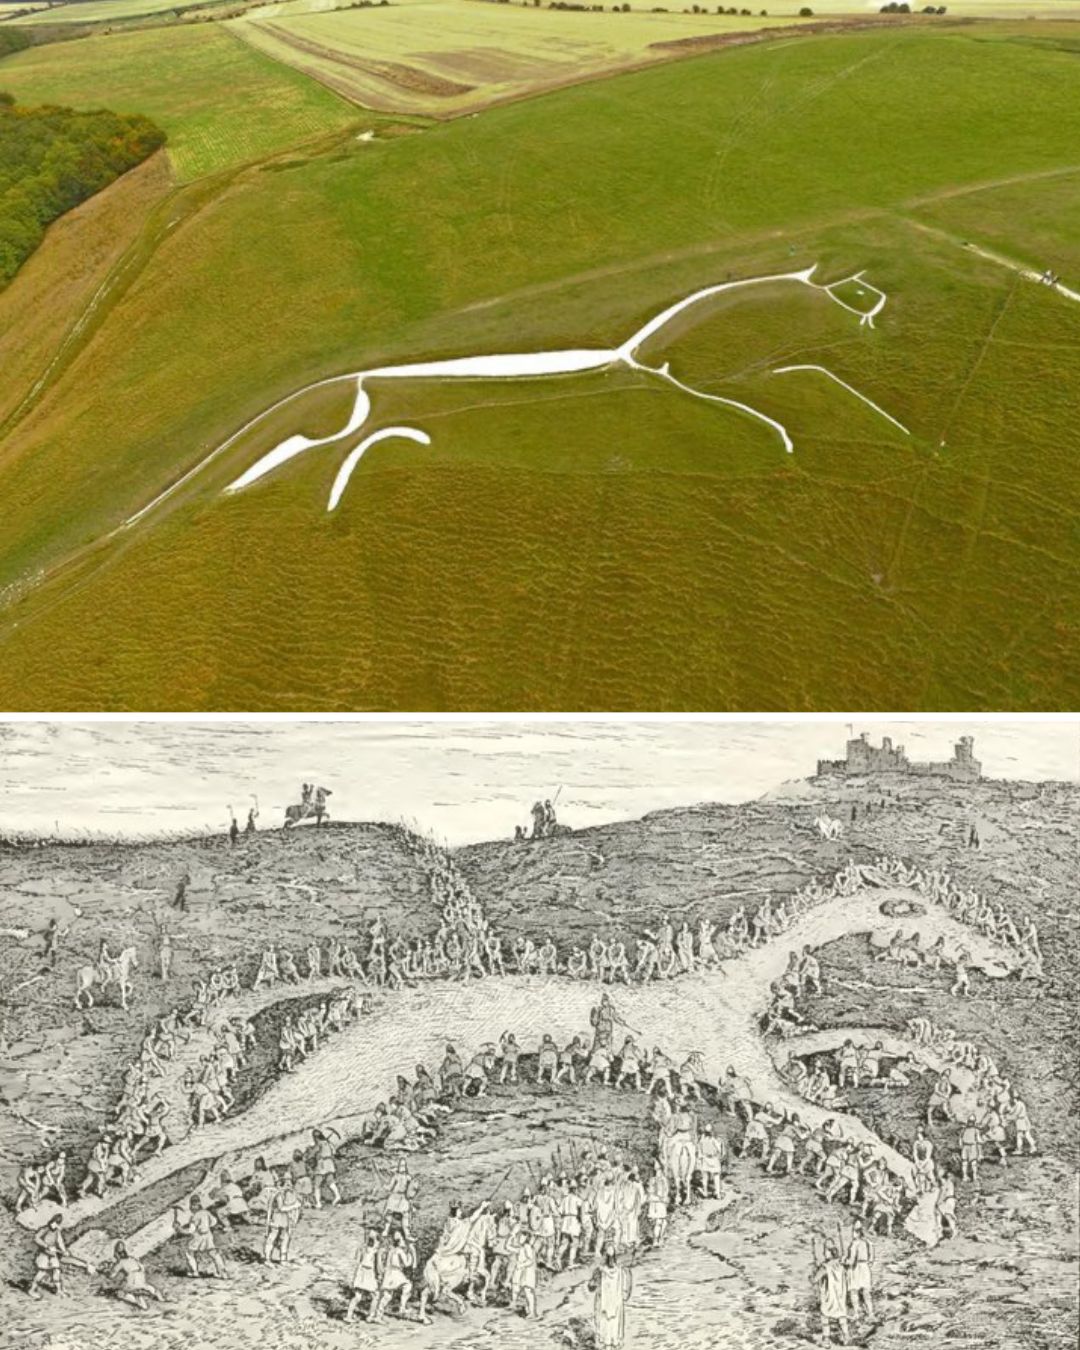 The White Horse of Uffington is a 3,000 year old prehistoric hill figure in Oxford.